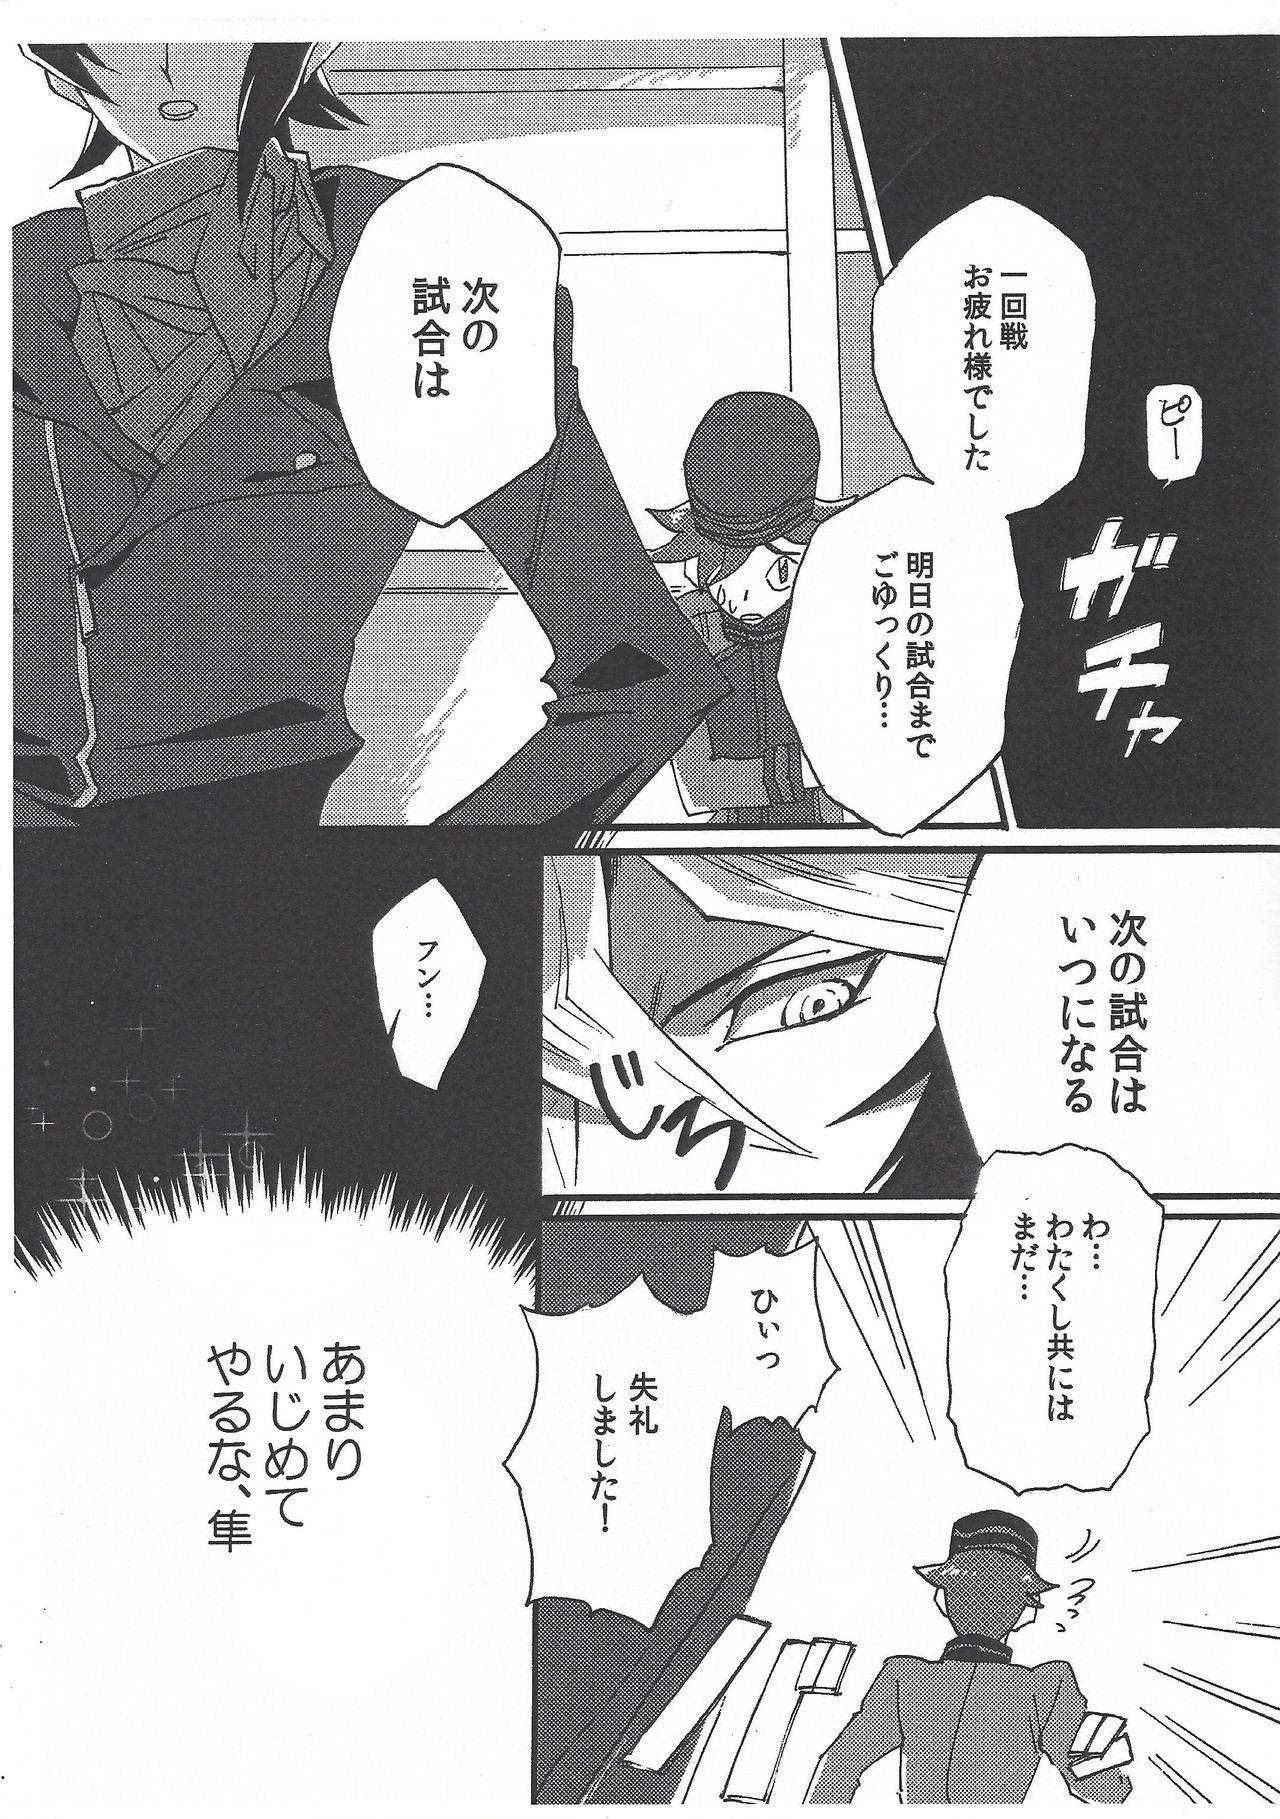 Hot GHOST ROOM - Yu gi oh arc v Buttfucking - Page 2